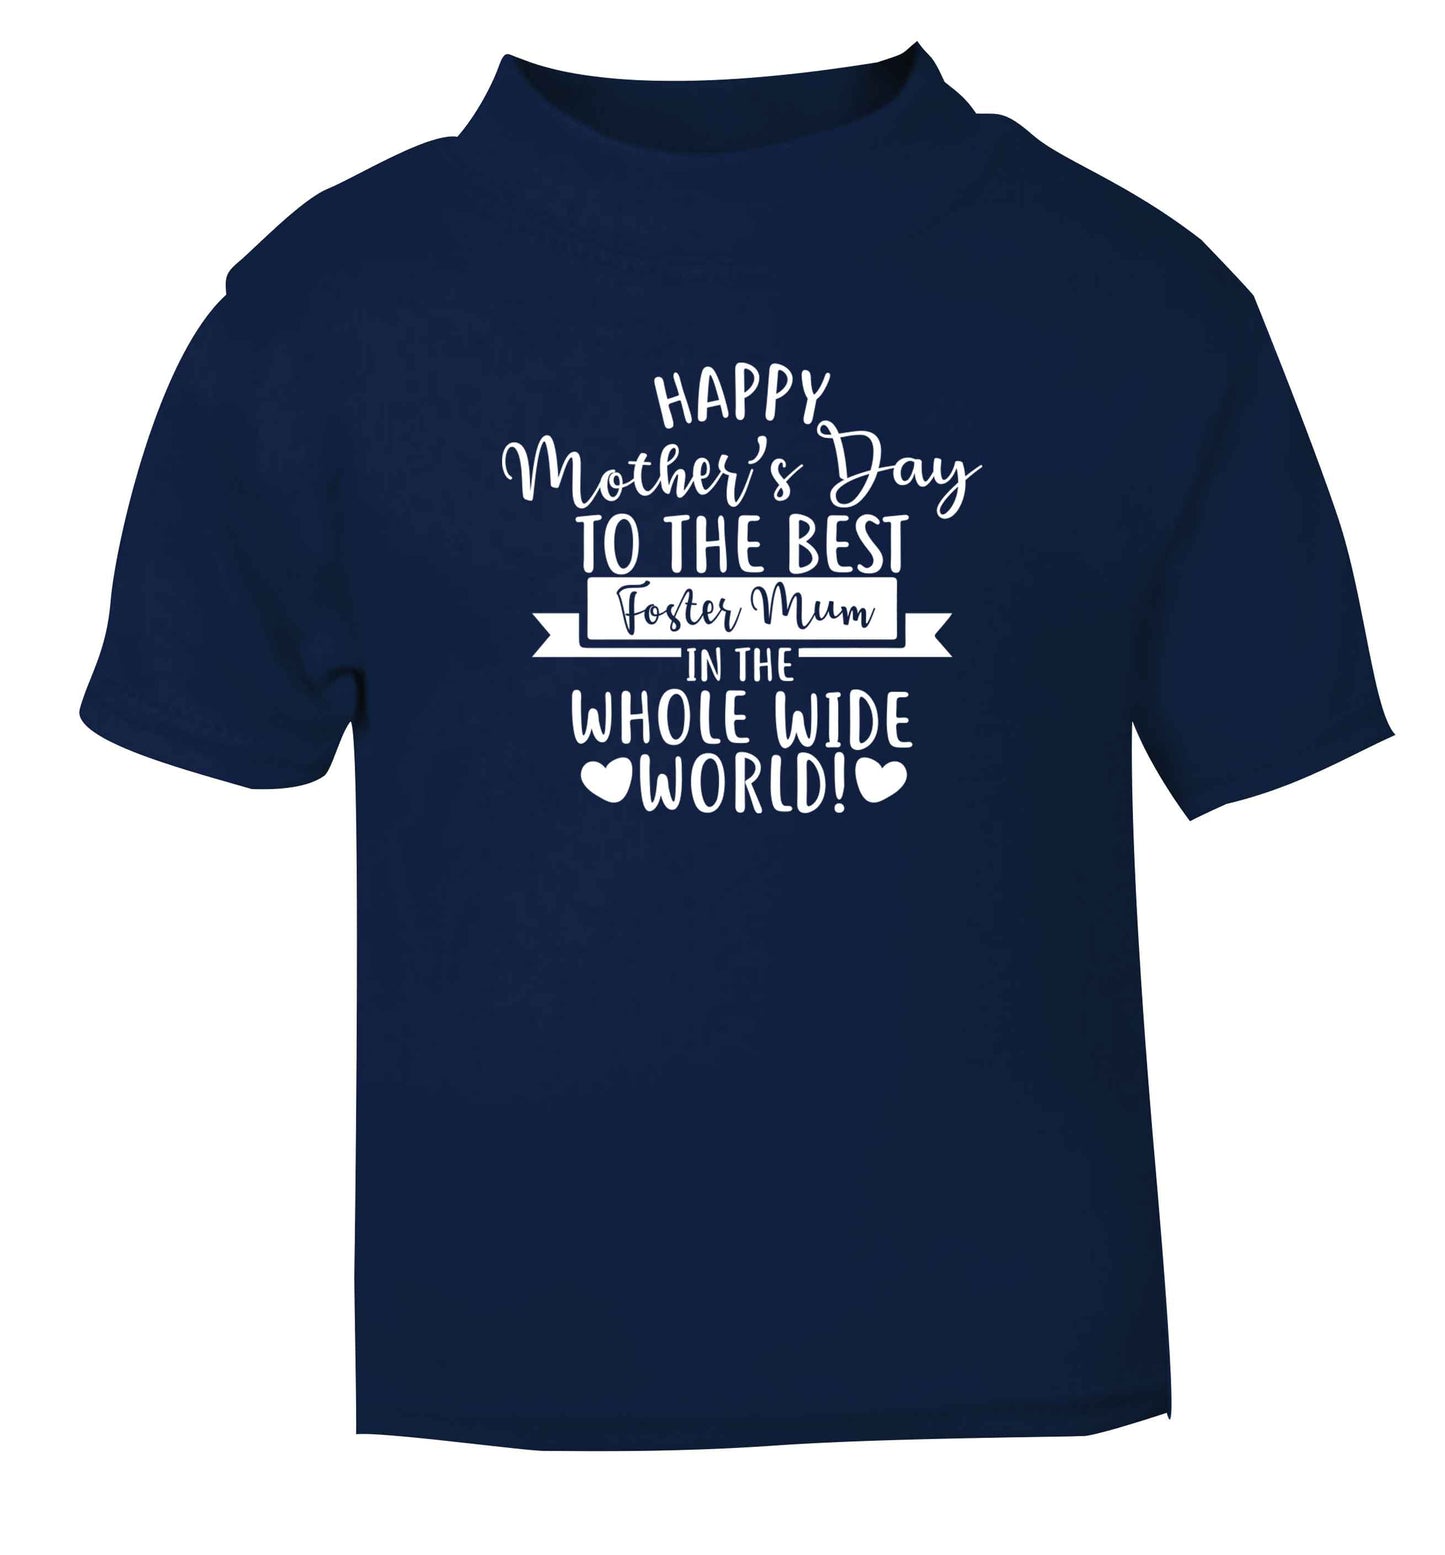 Happy mother's day to the best foster mum in the world navy baby toddler Tshirt 2 Years